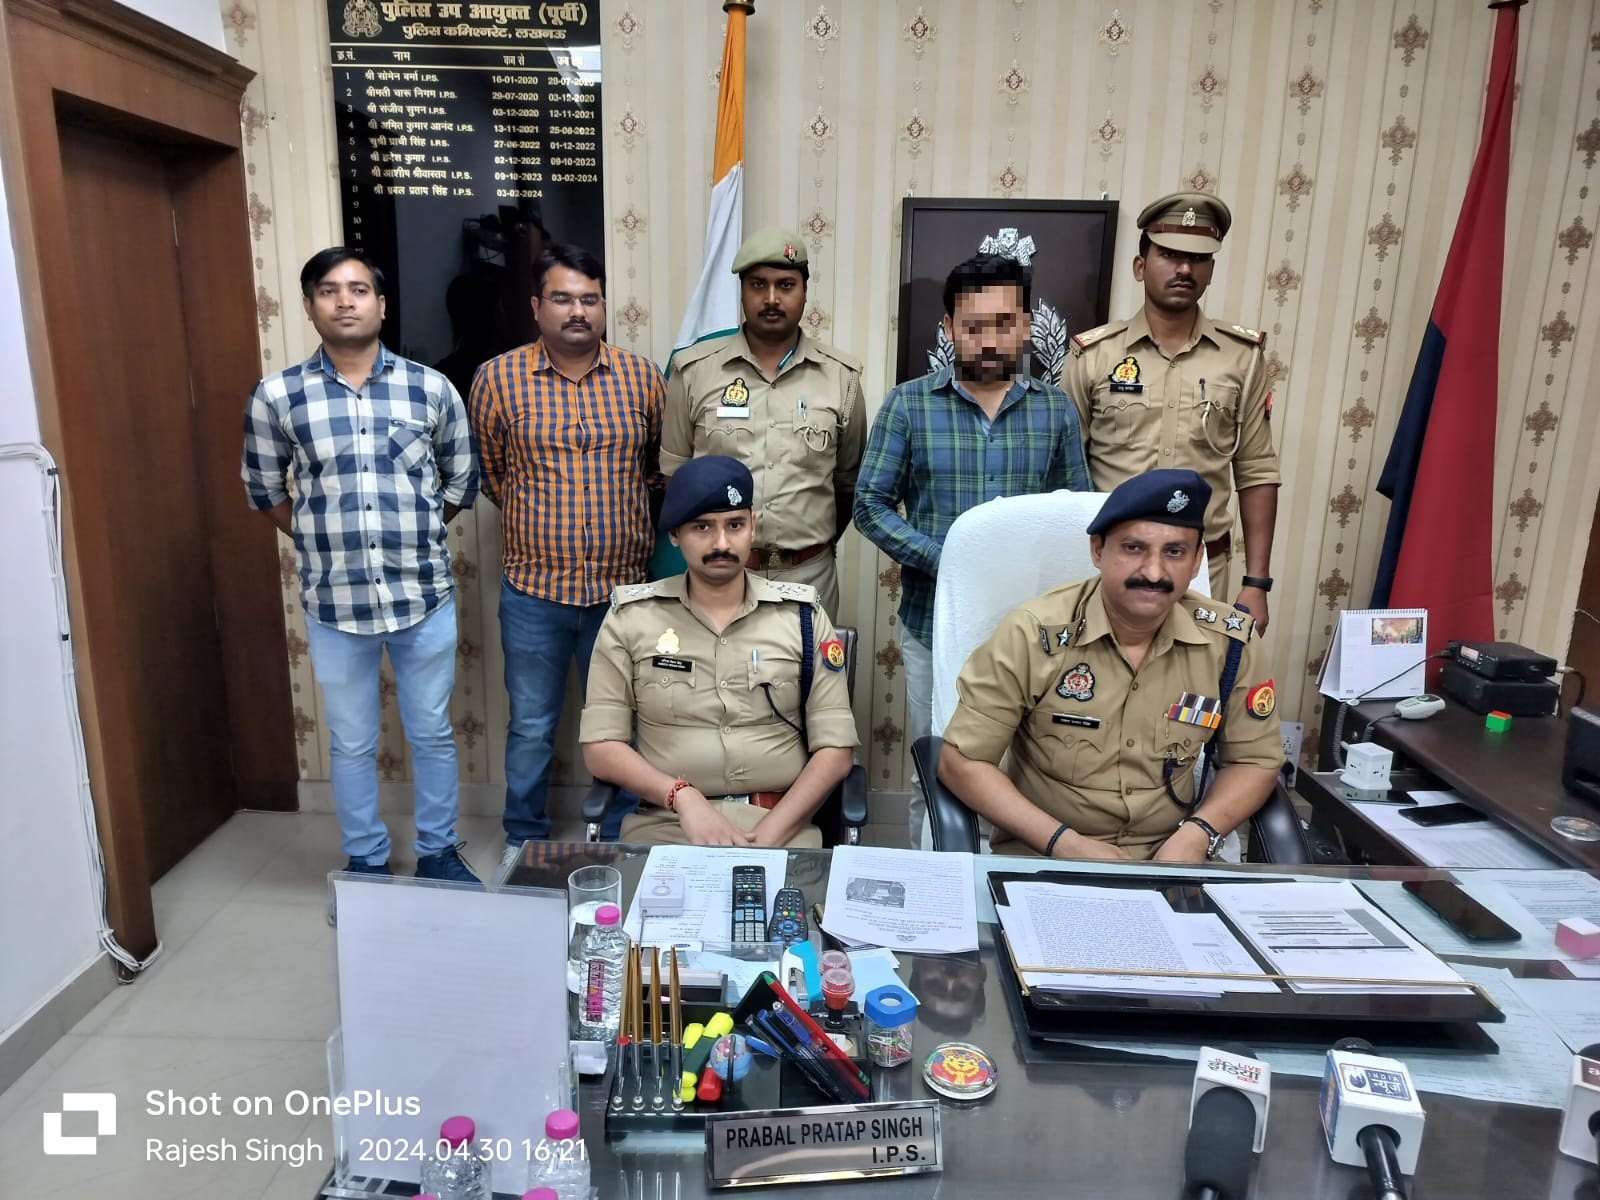 Successfully exposing the incident of false theft of Audi car, the vicious accused involved in the incident was arrested.